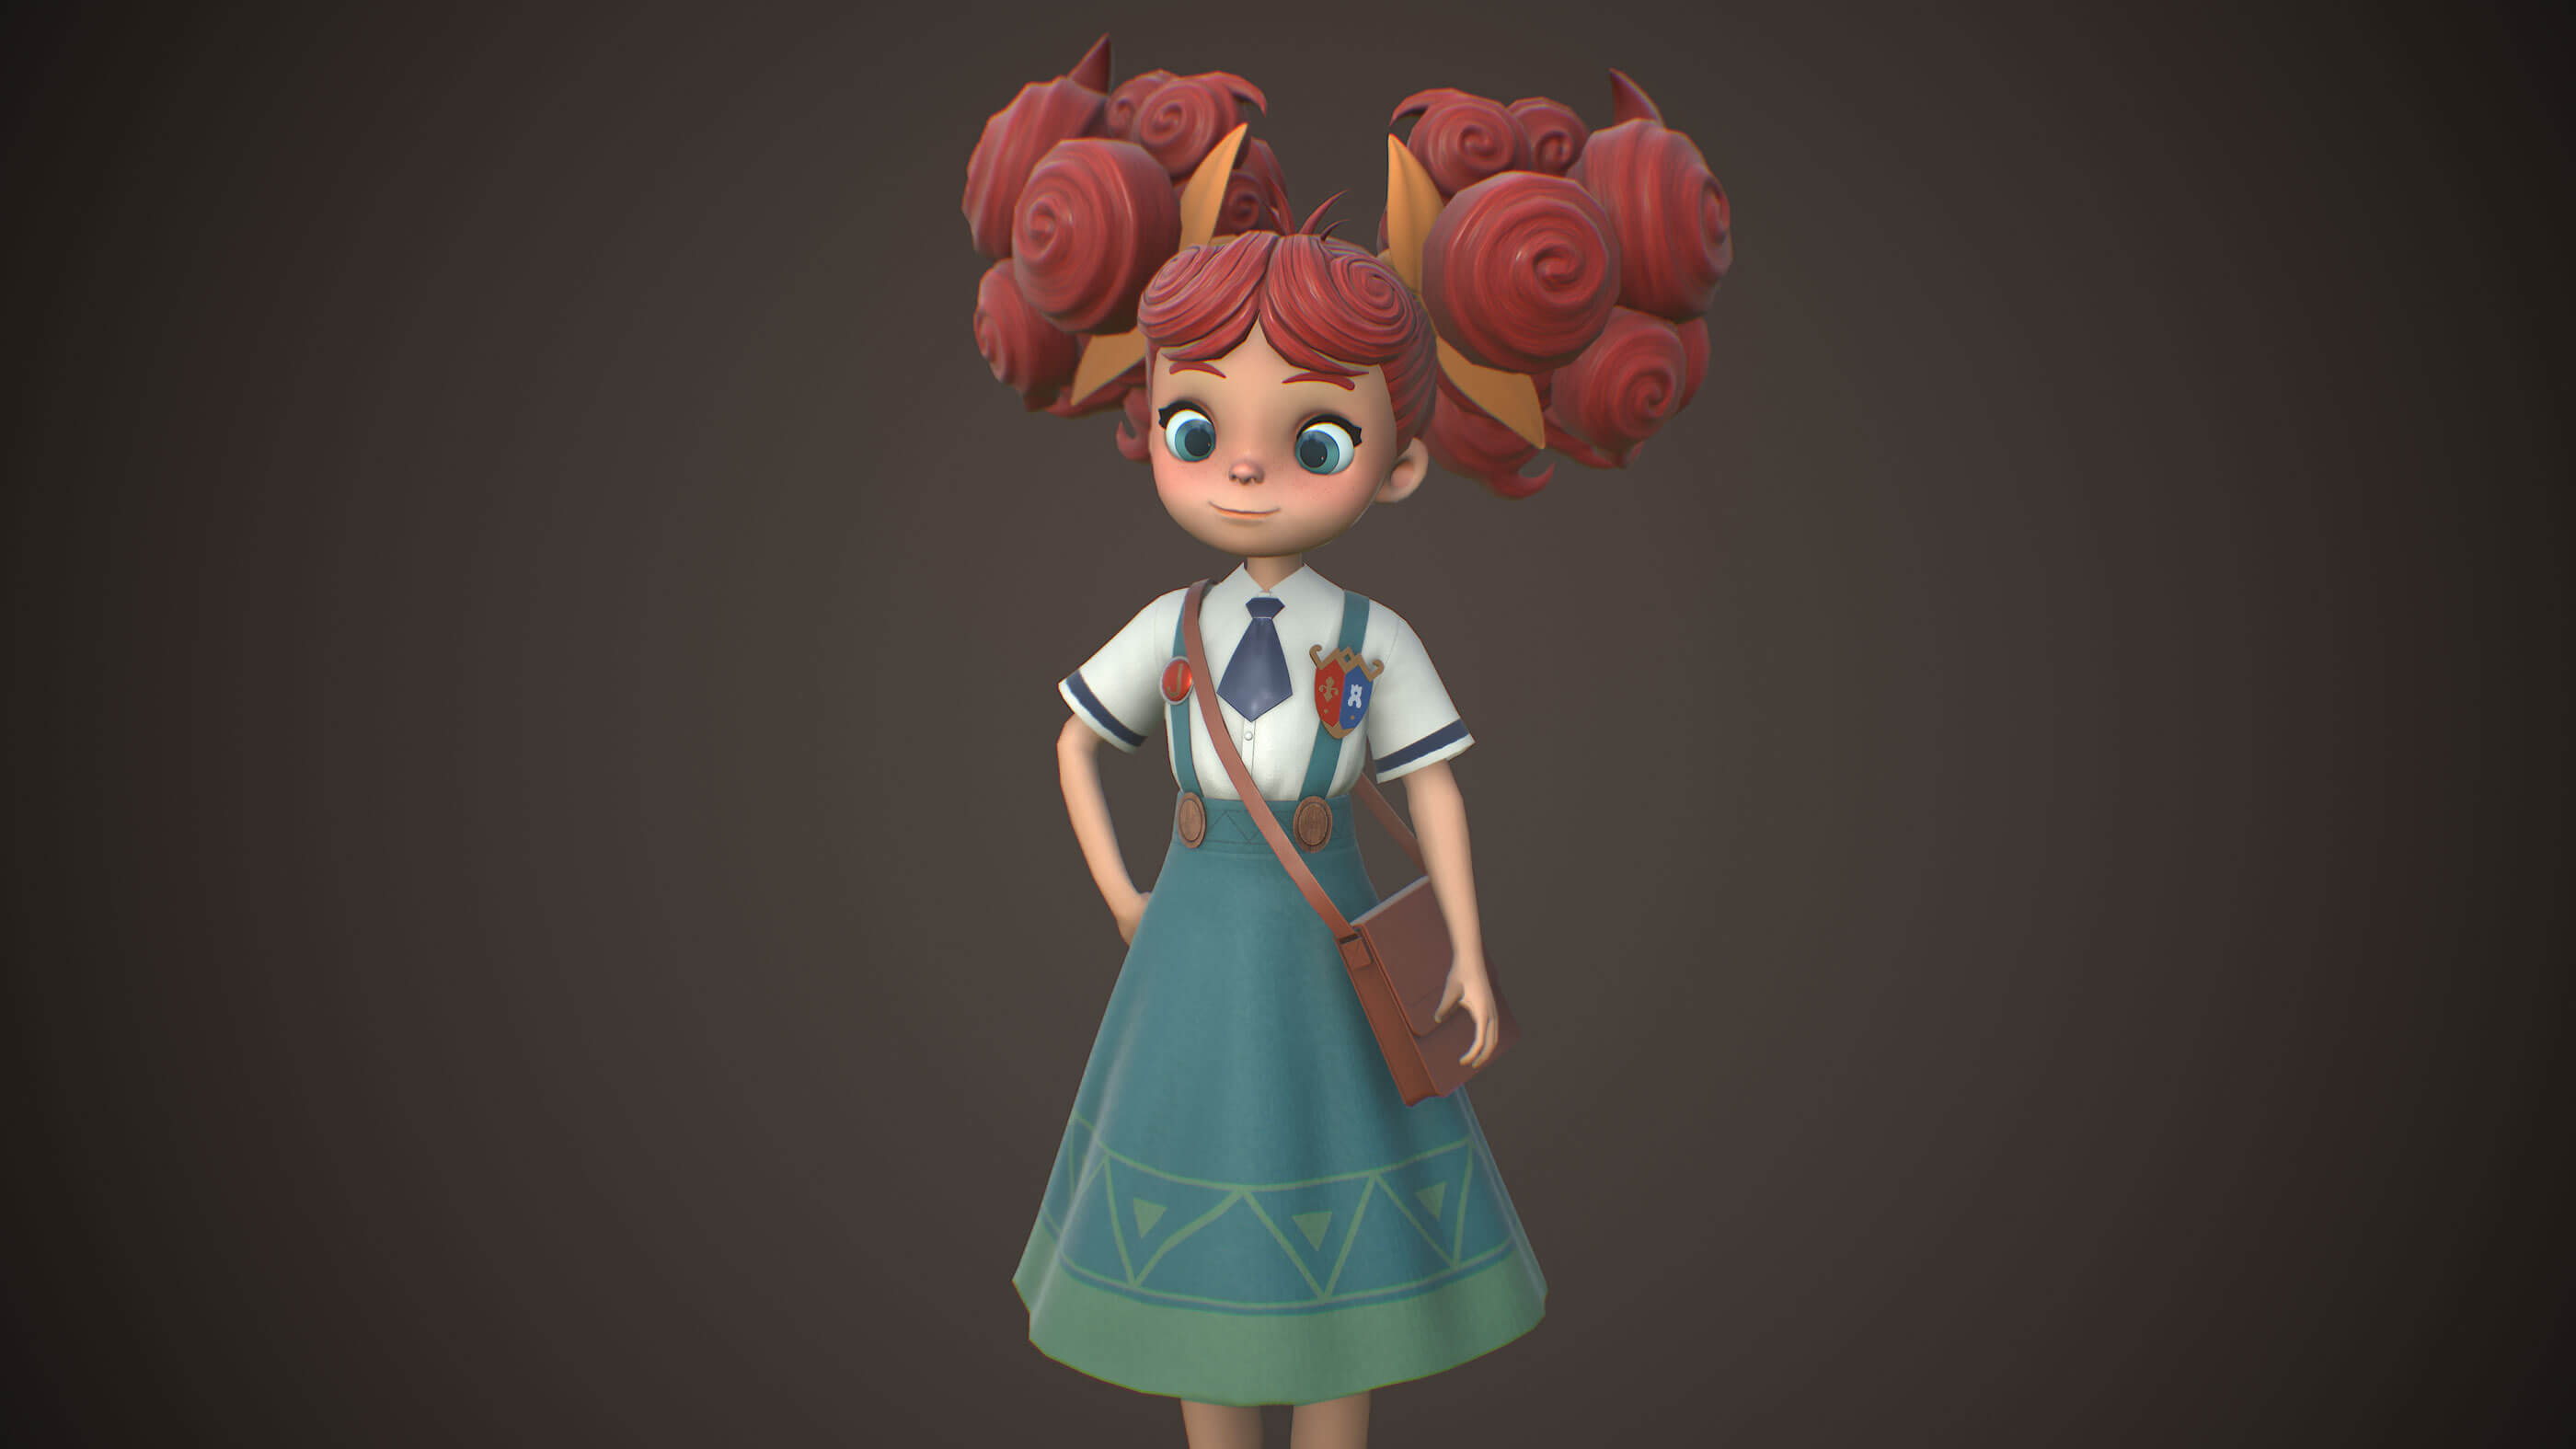 A young school girl with eccentric red hair wears a school uniform and a purse